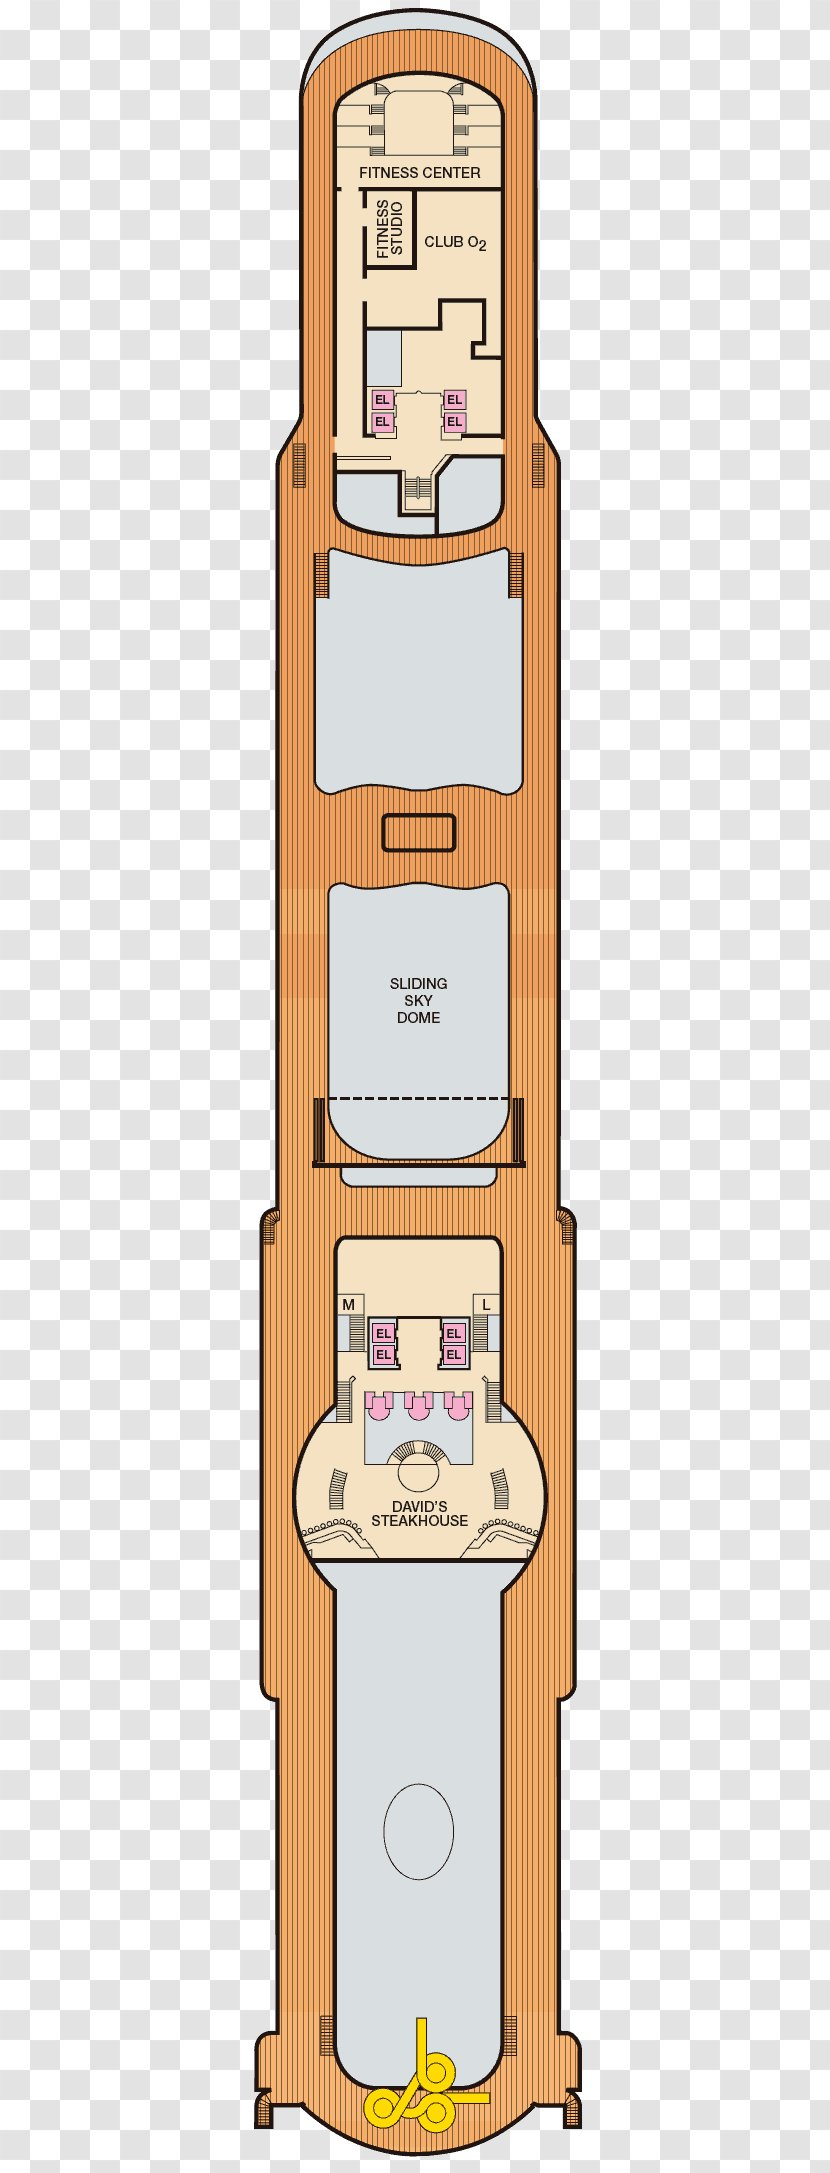 Furniture Angle Product Design Line - Carnival Pride Balcony Room Transparent PNG